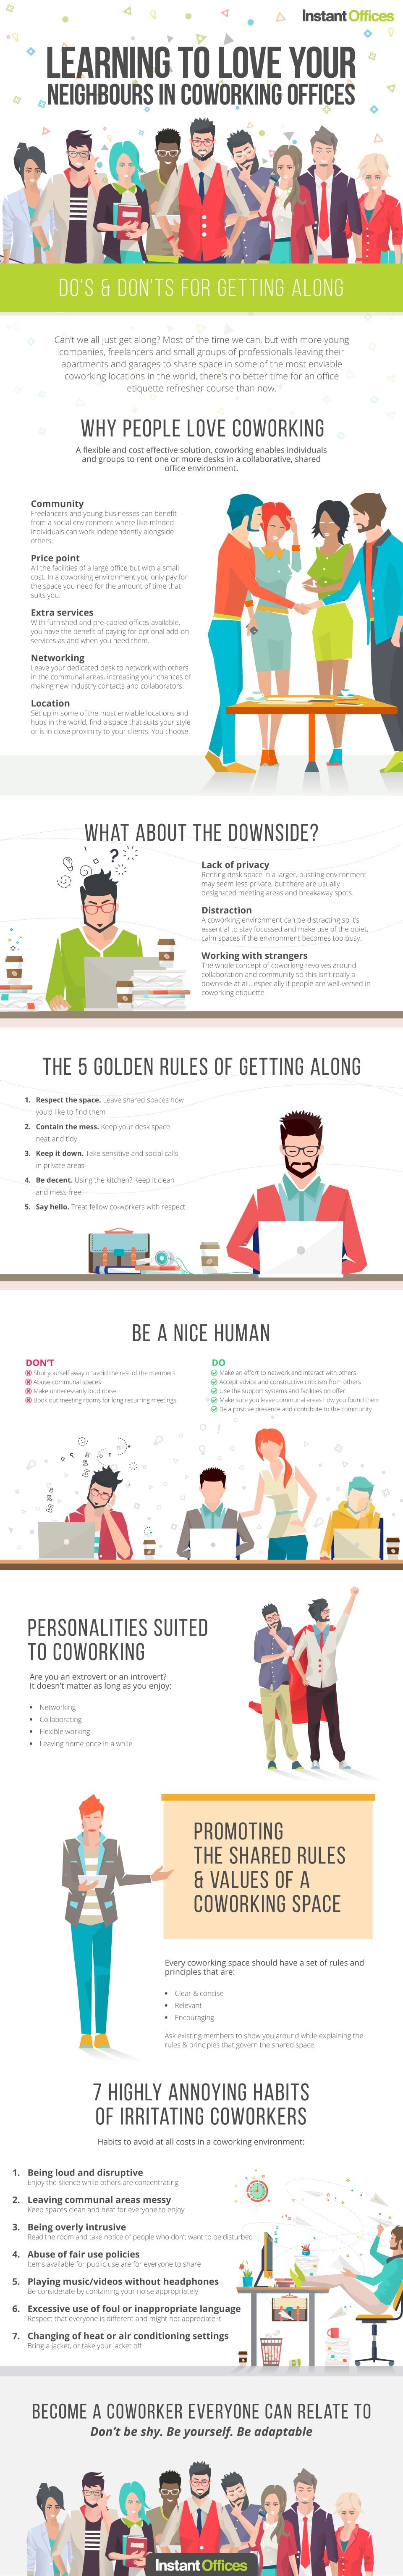 Infographic- Workplace etiquette for coworkers - do's & don'ts 